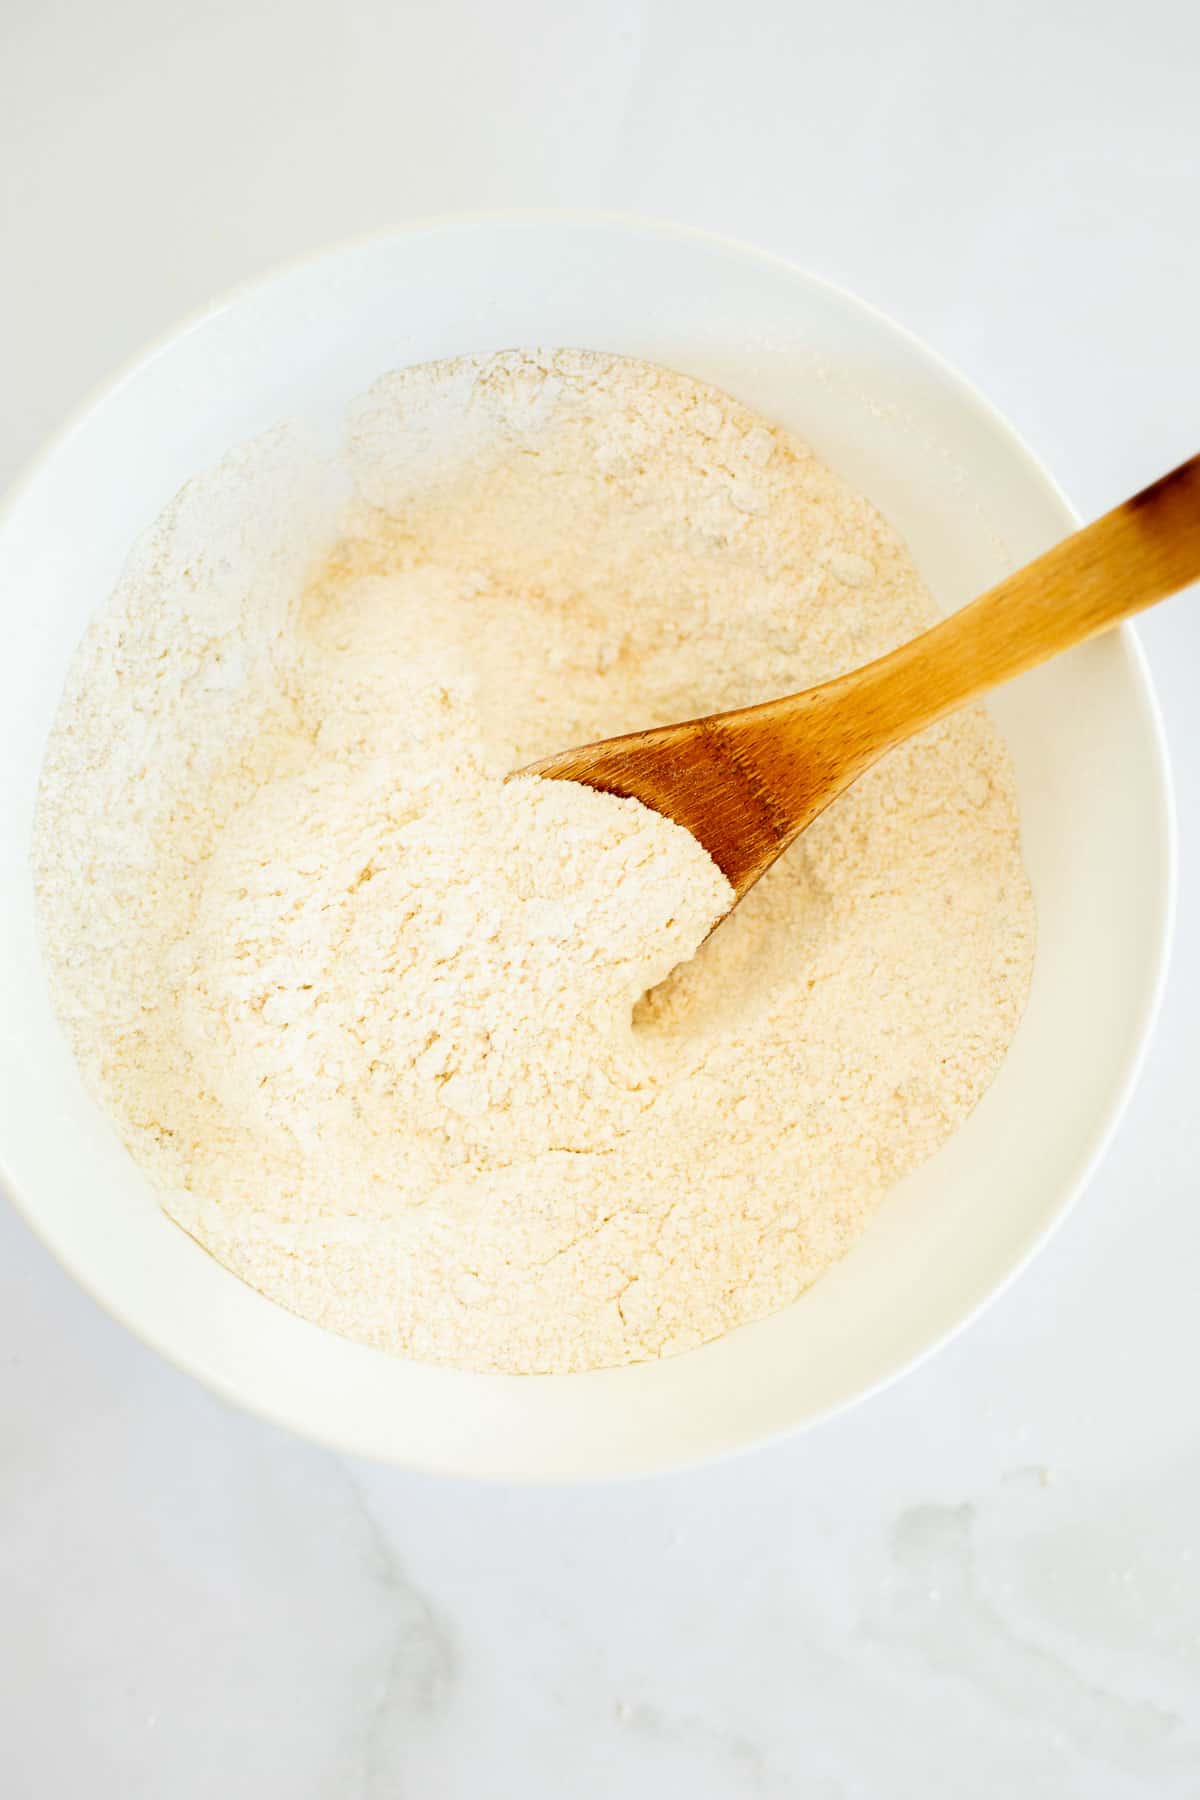 flour, sugar, salt, and baking powder mixed together in a white bowl.